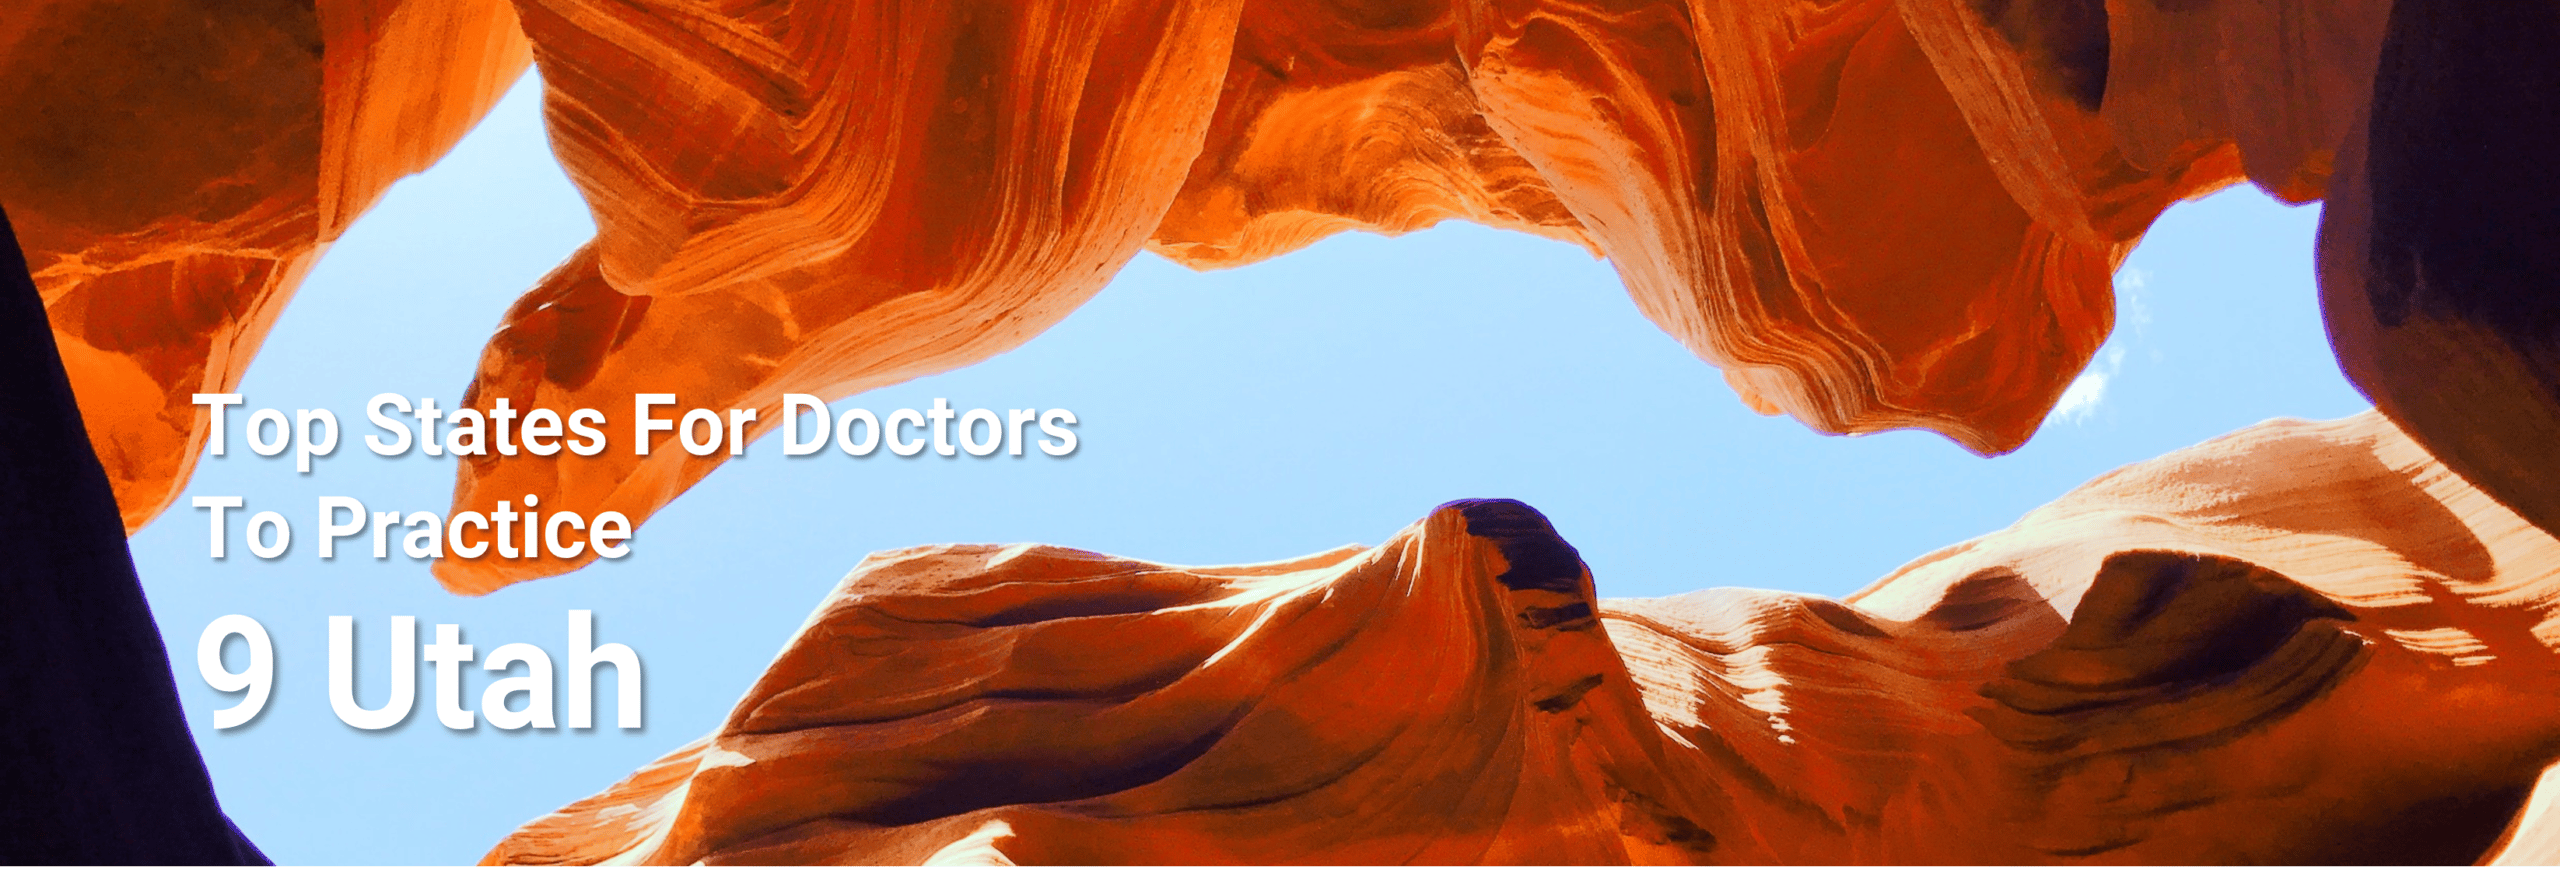 Top States for Doctors to Practice 9 Utah